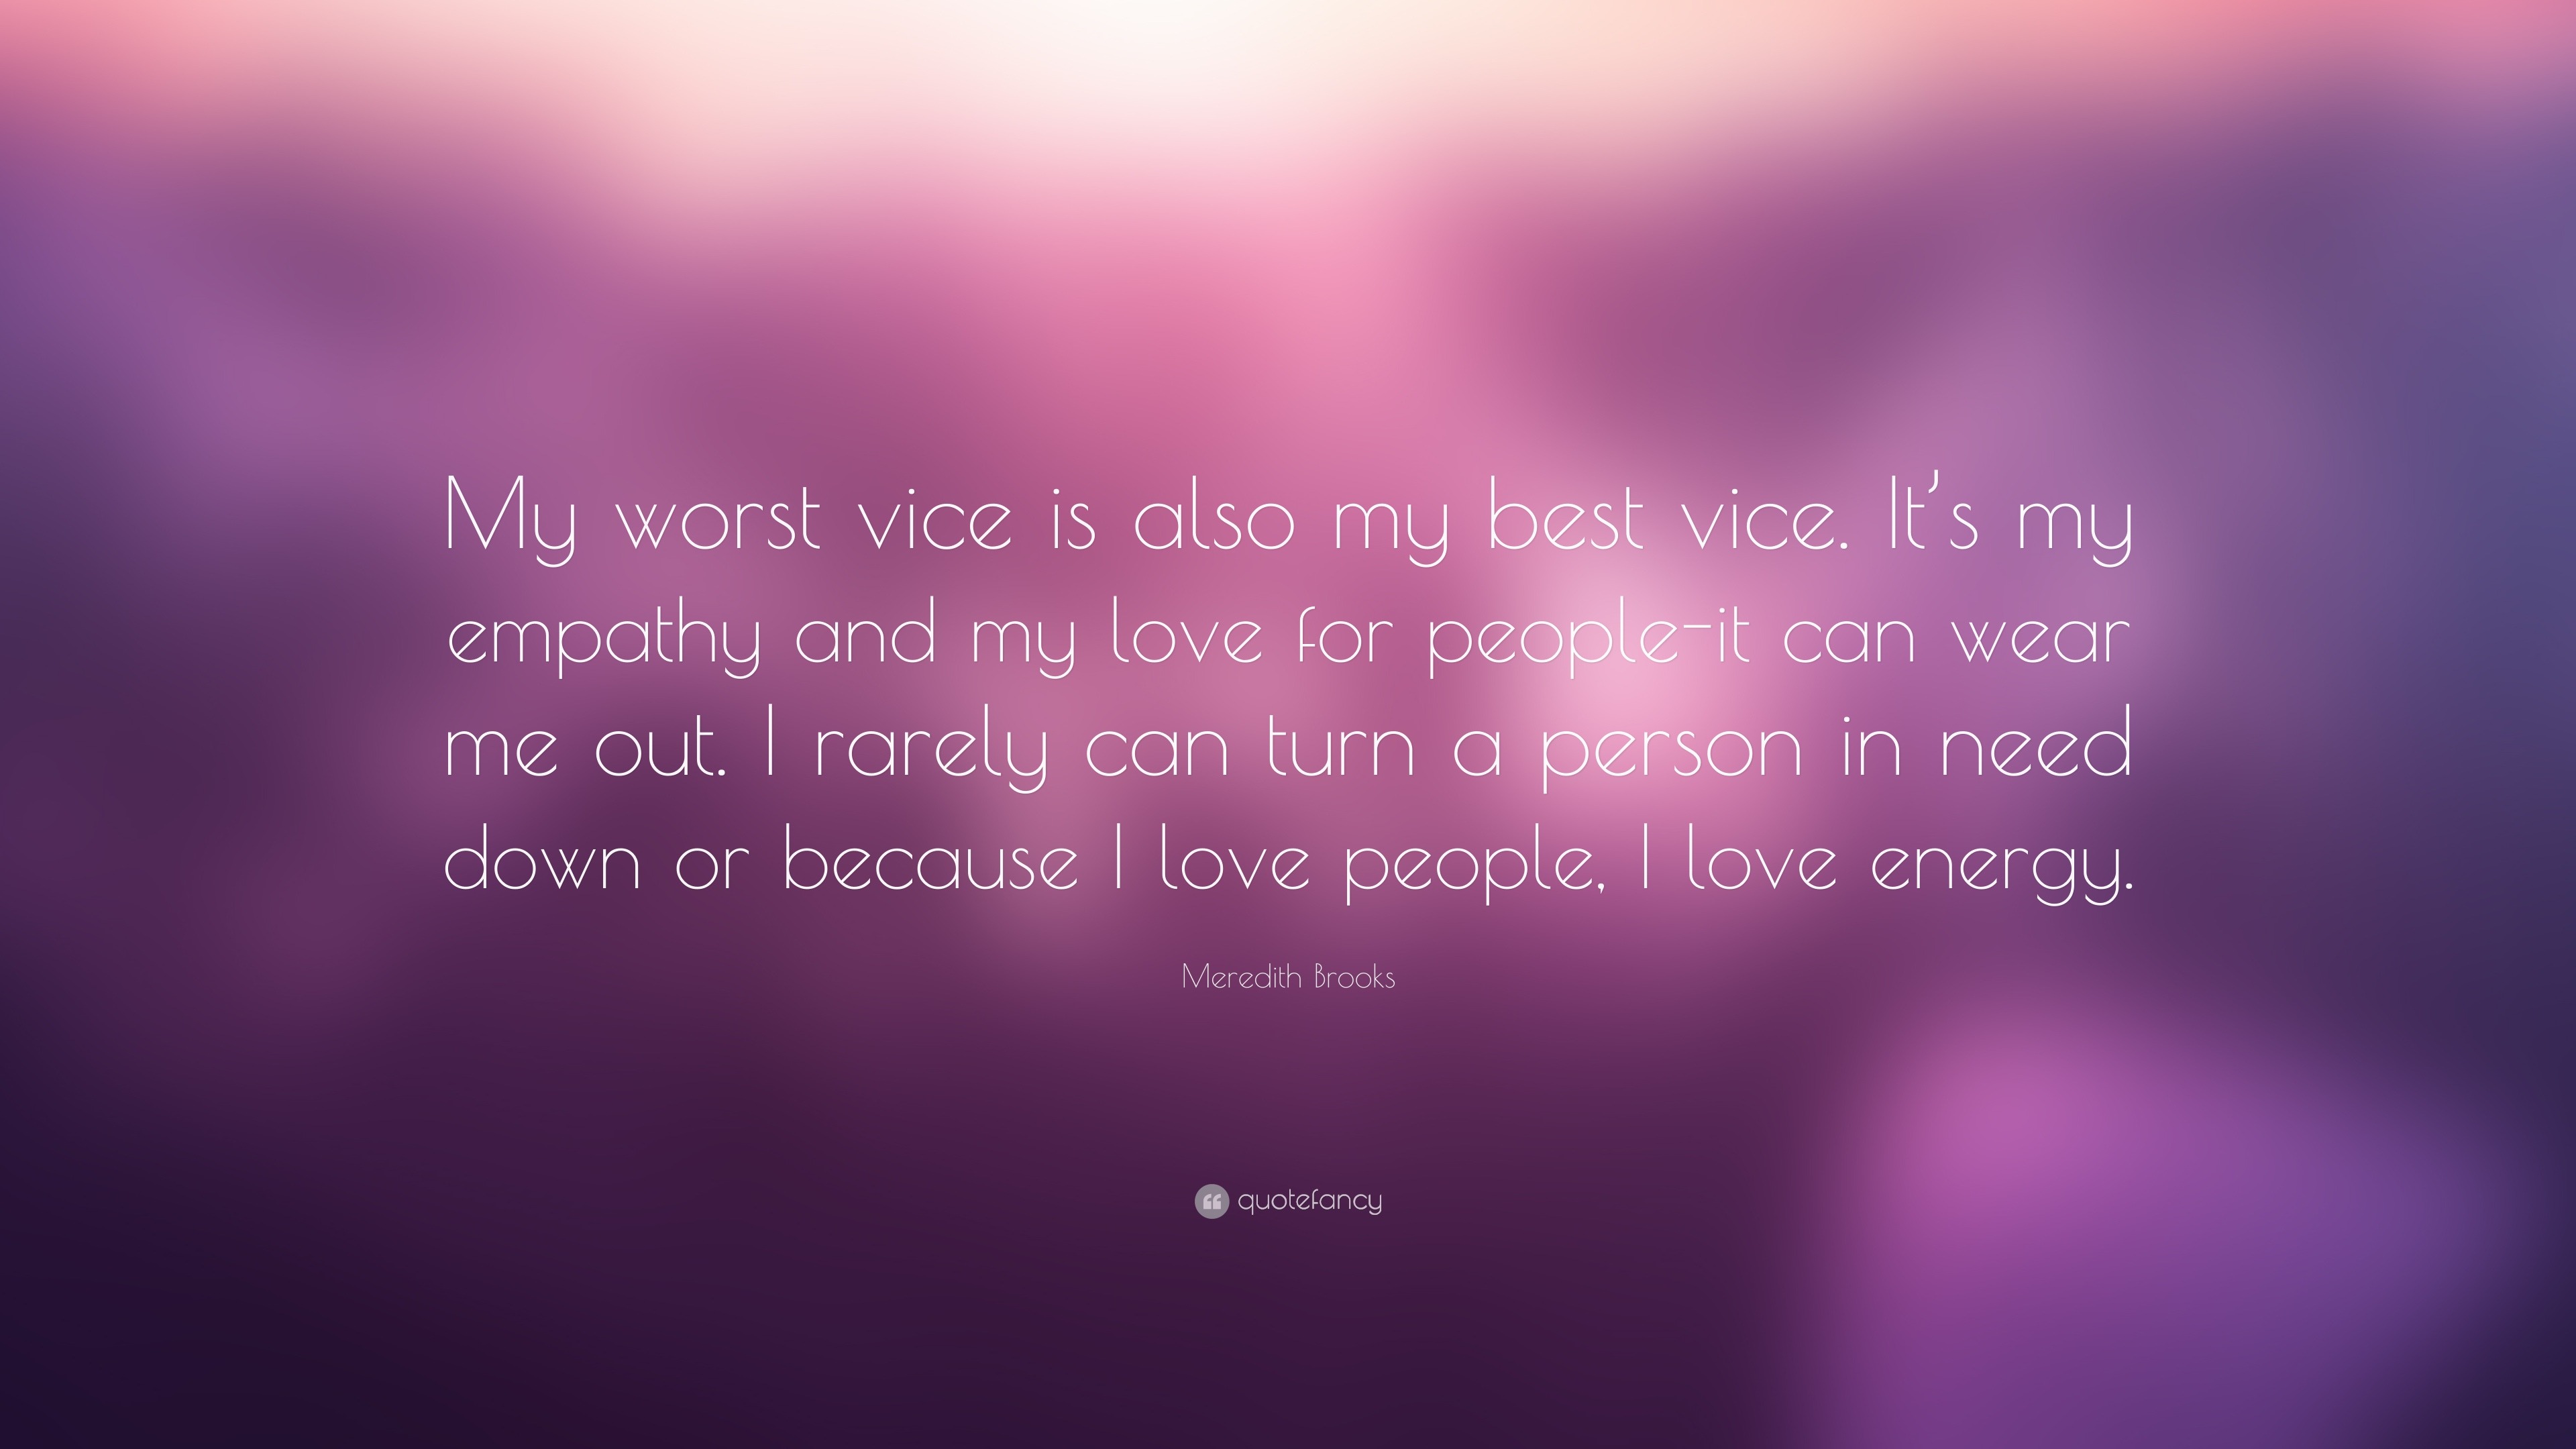 Meredith Brooks Quote “My worst vice is also my best vice It s my